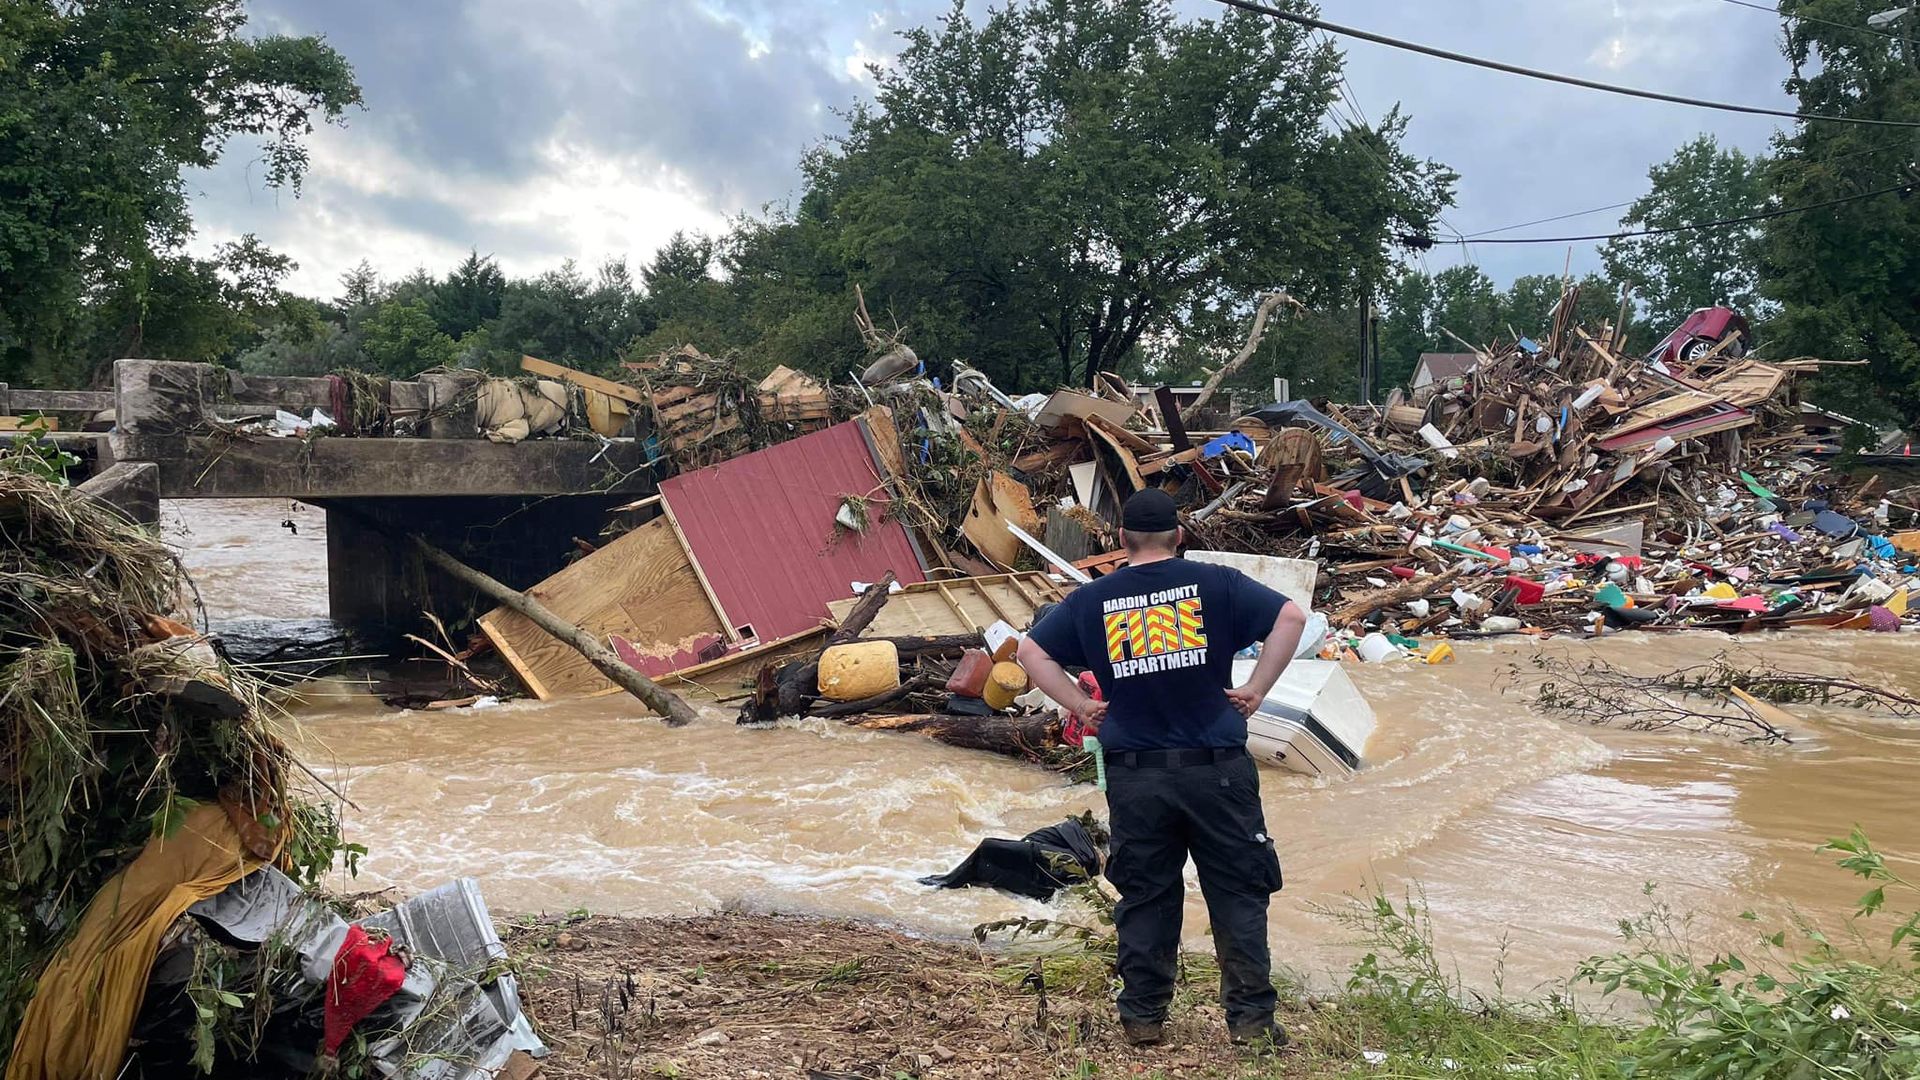 A scene of the devastation from the flooding in Hardin County, Tenn.